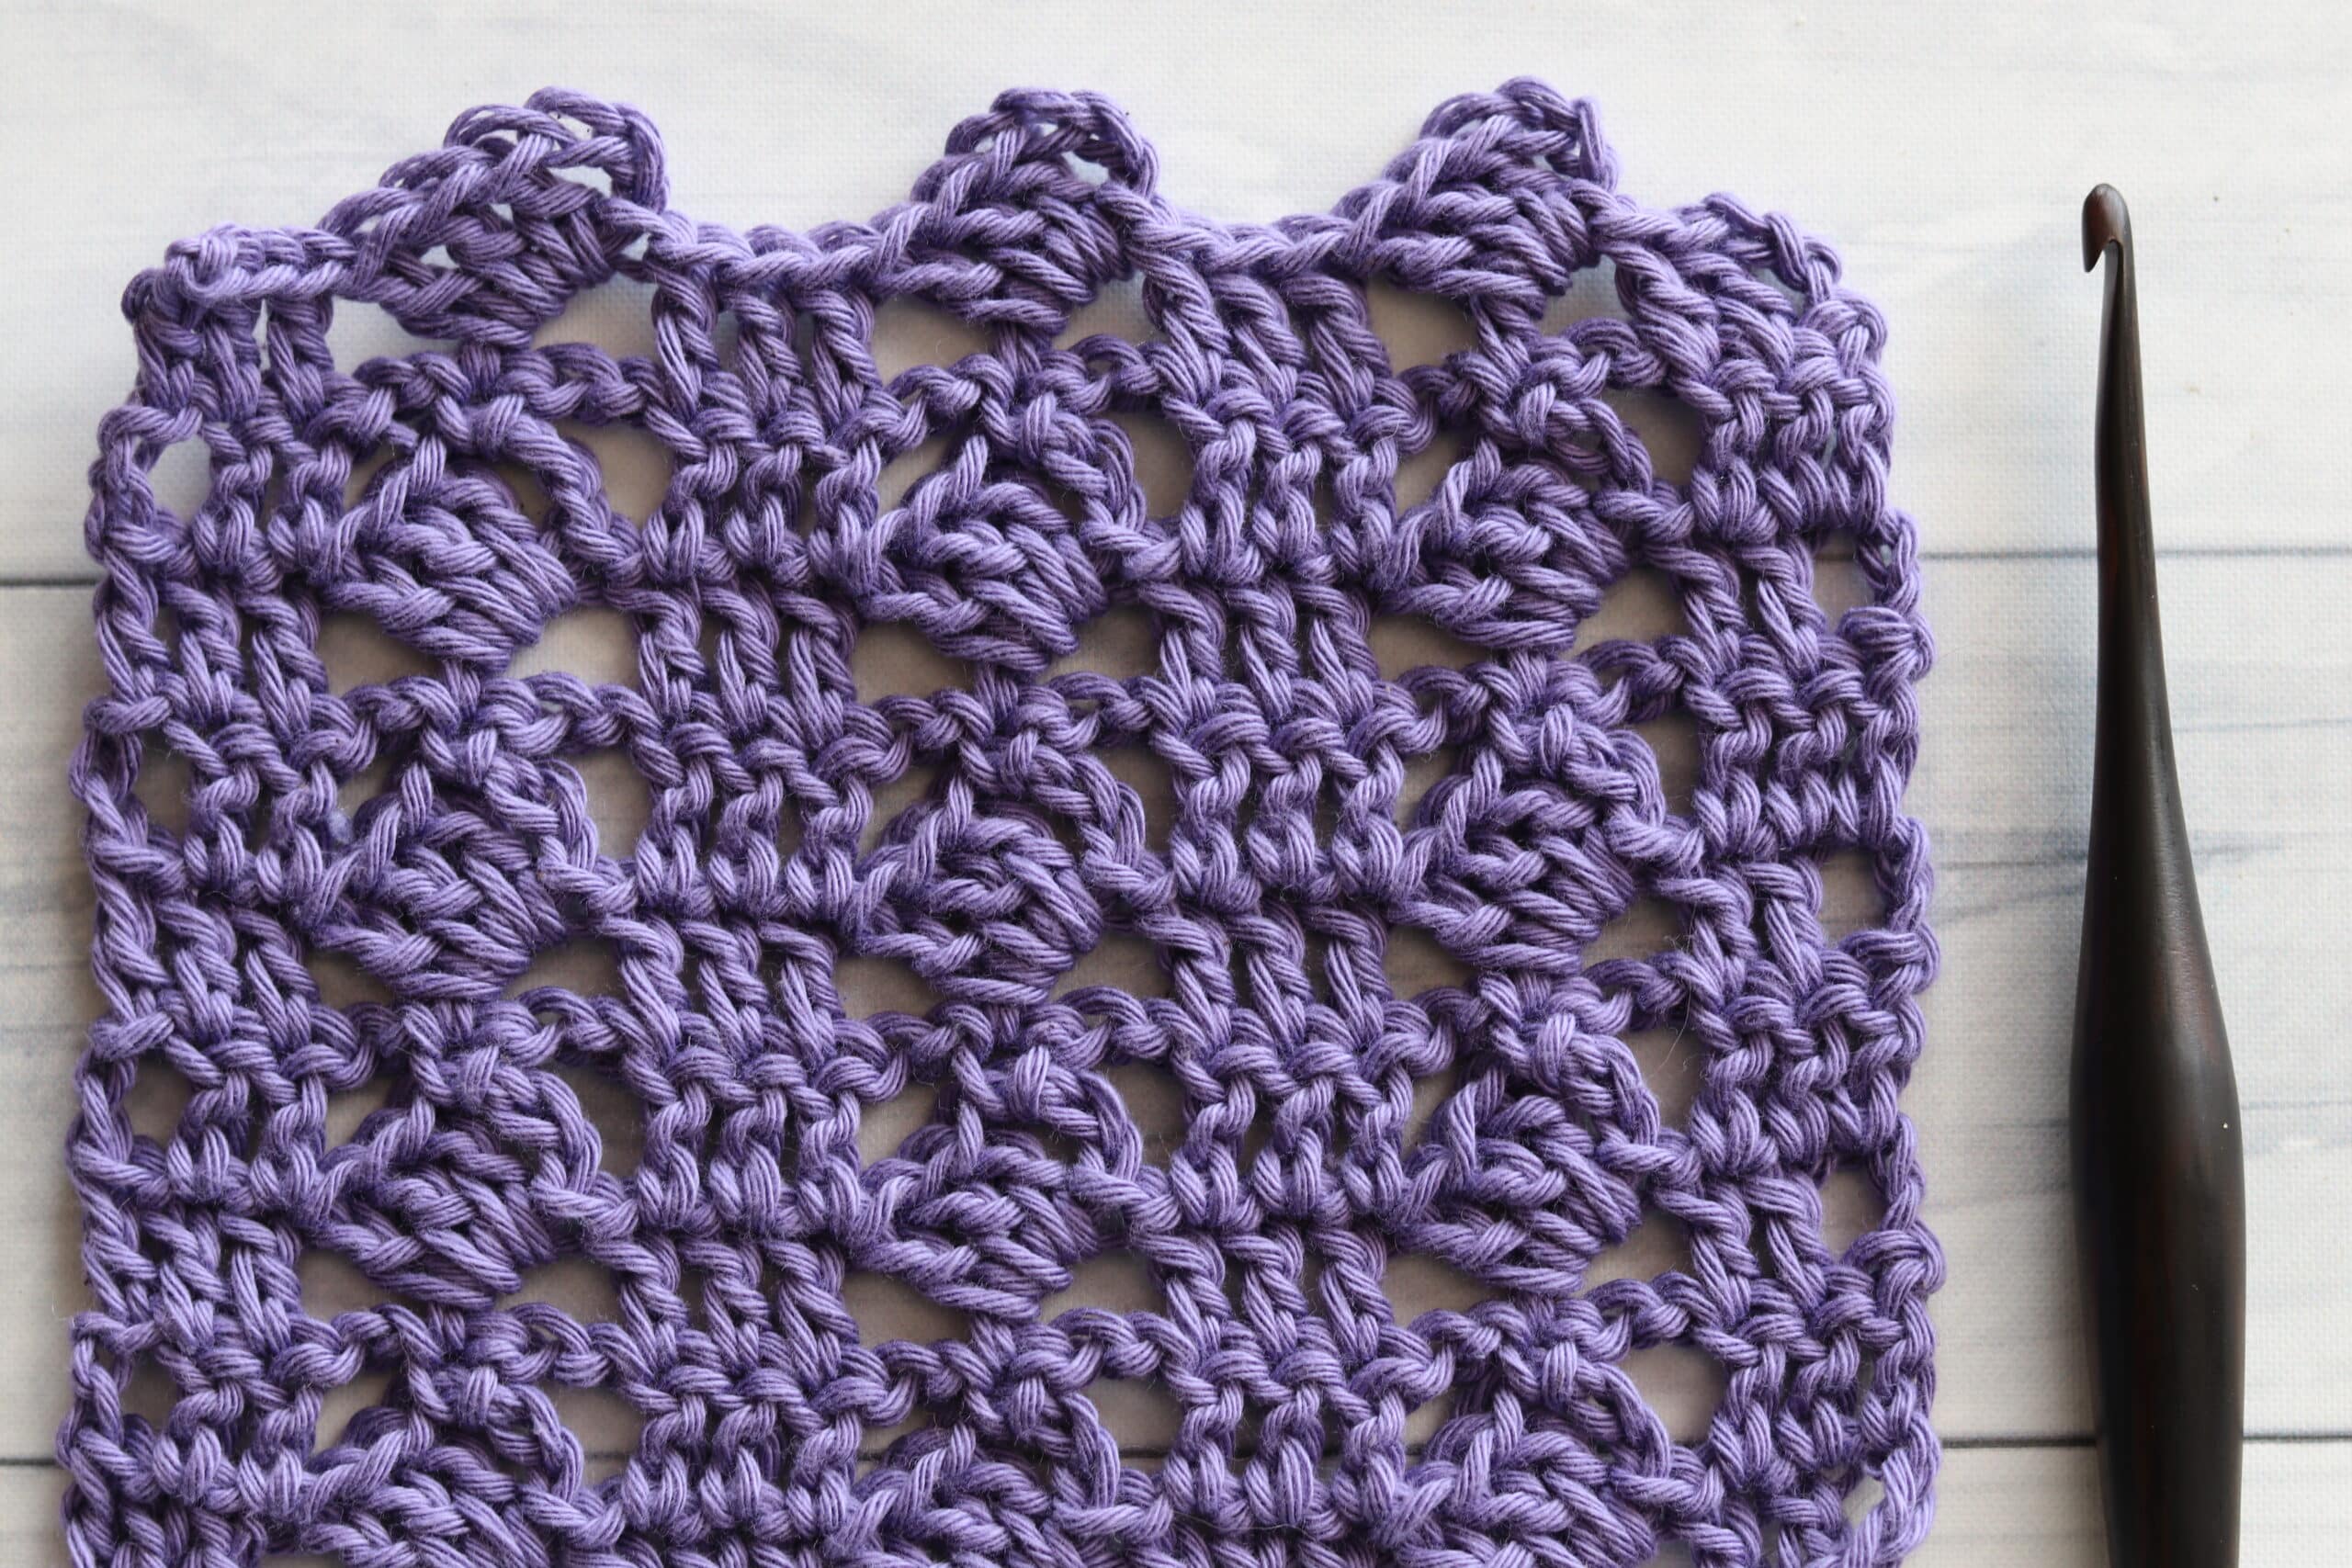 tilted rows crochet stitch